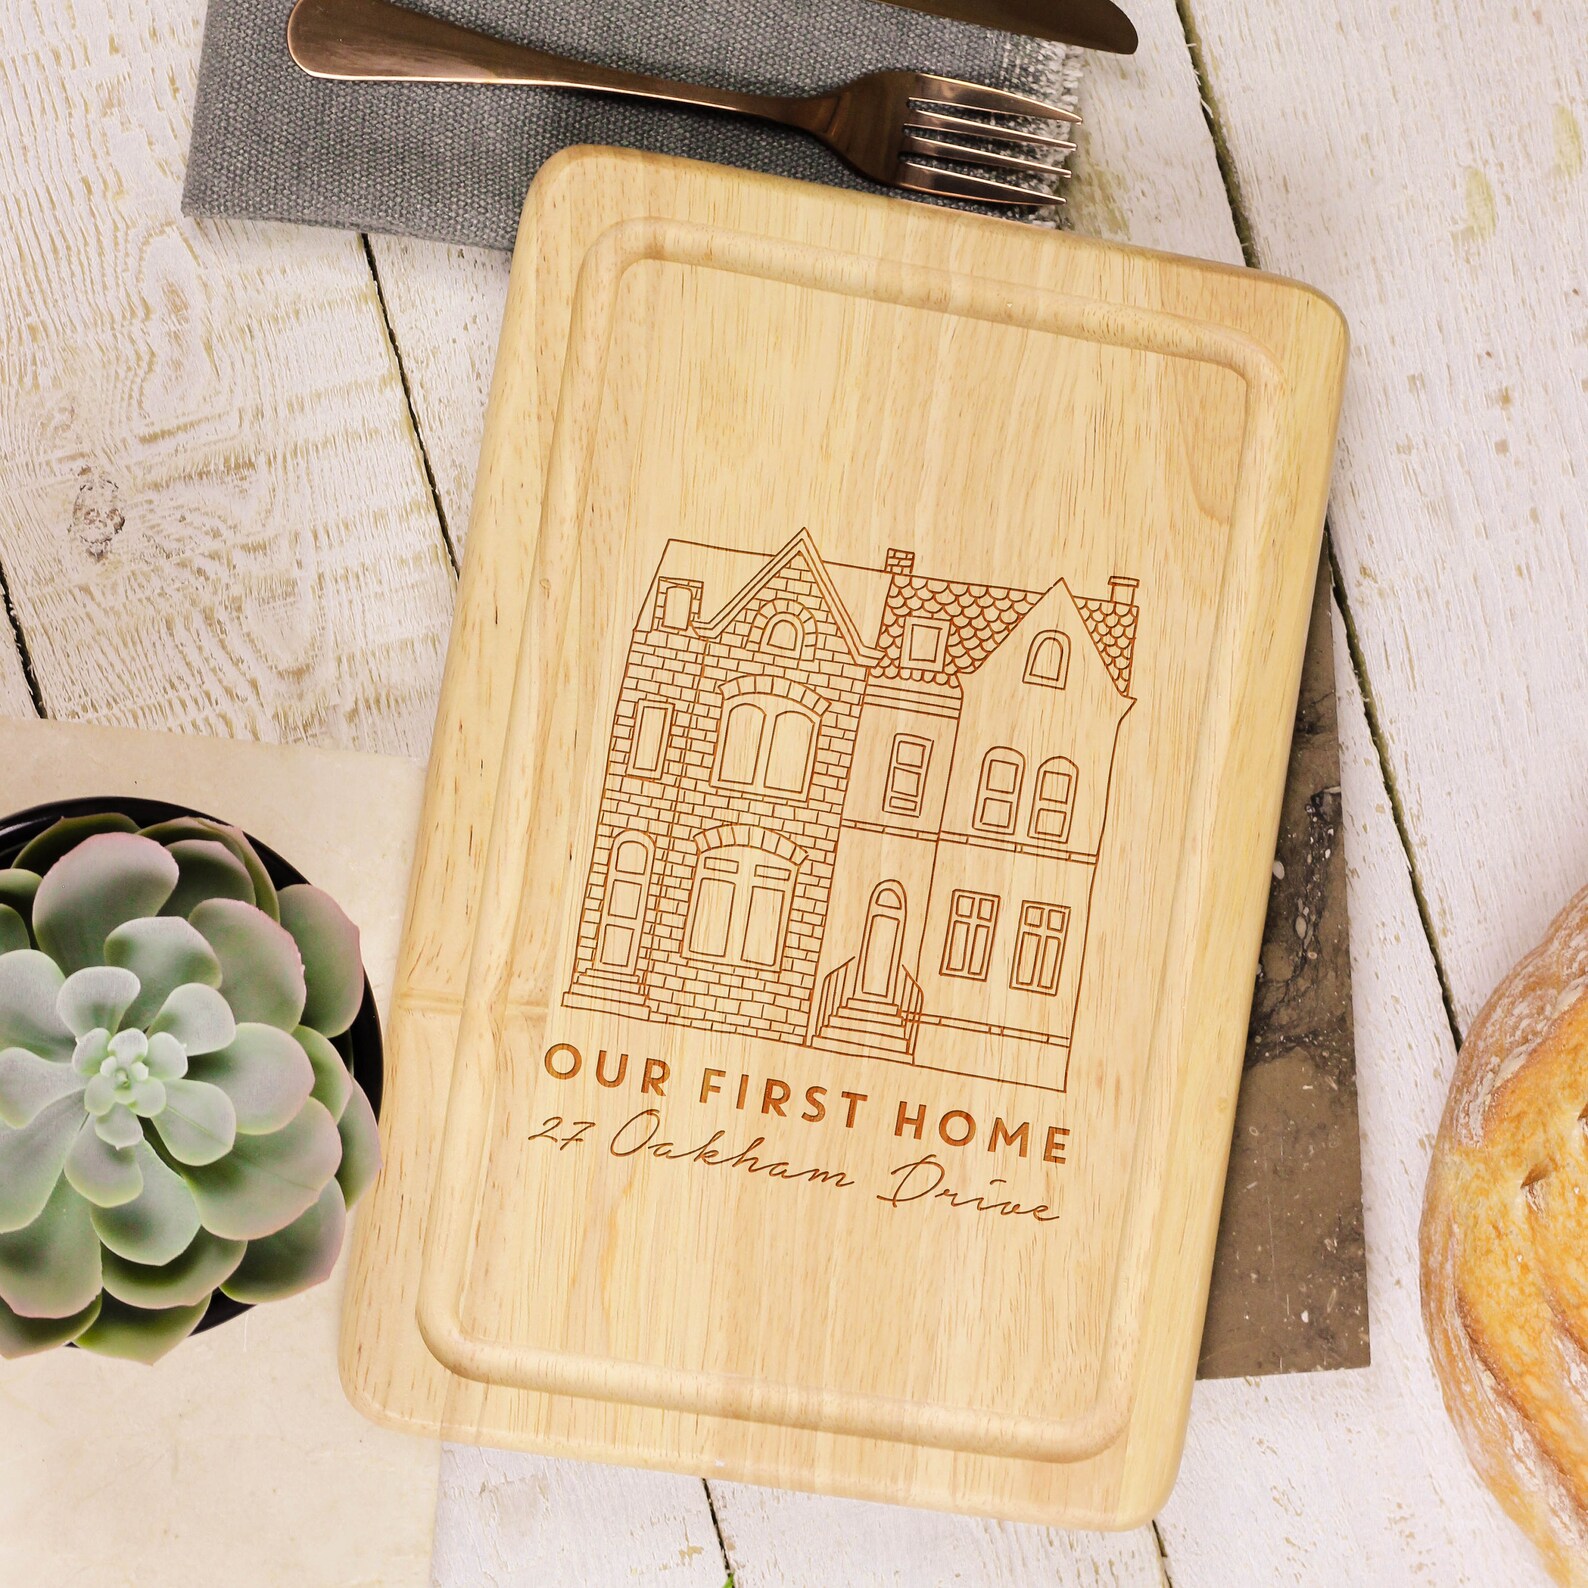 a custom cutting board that has a hand drawn image of a home with the text Our First Home and the address listed underneath it. This is a great glowforge project to make and sell.